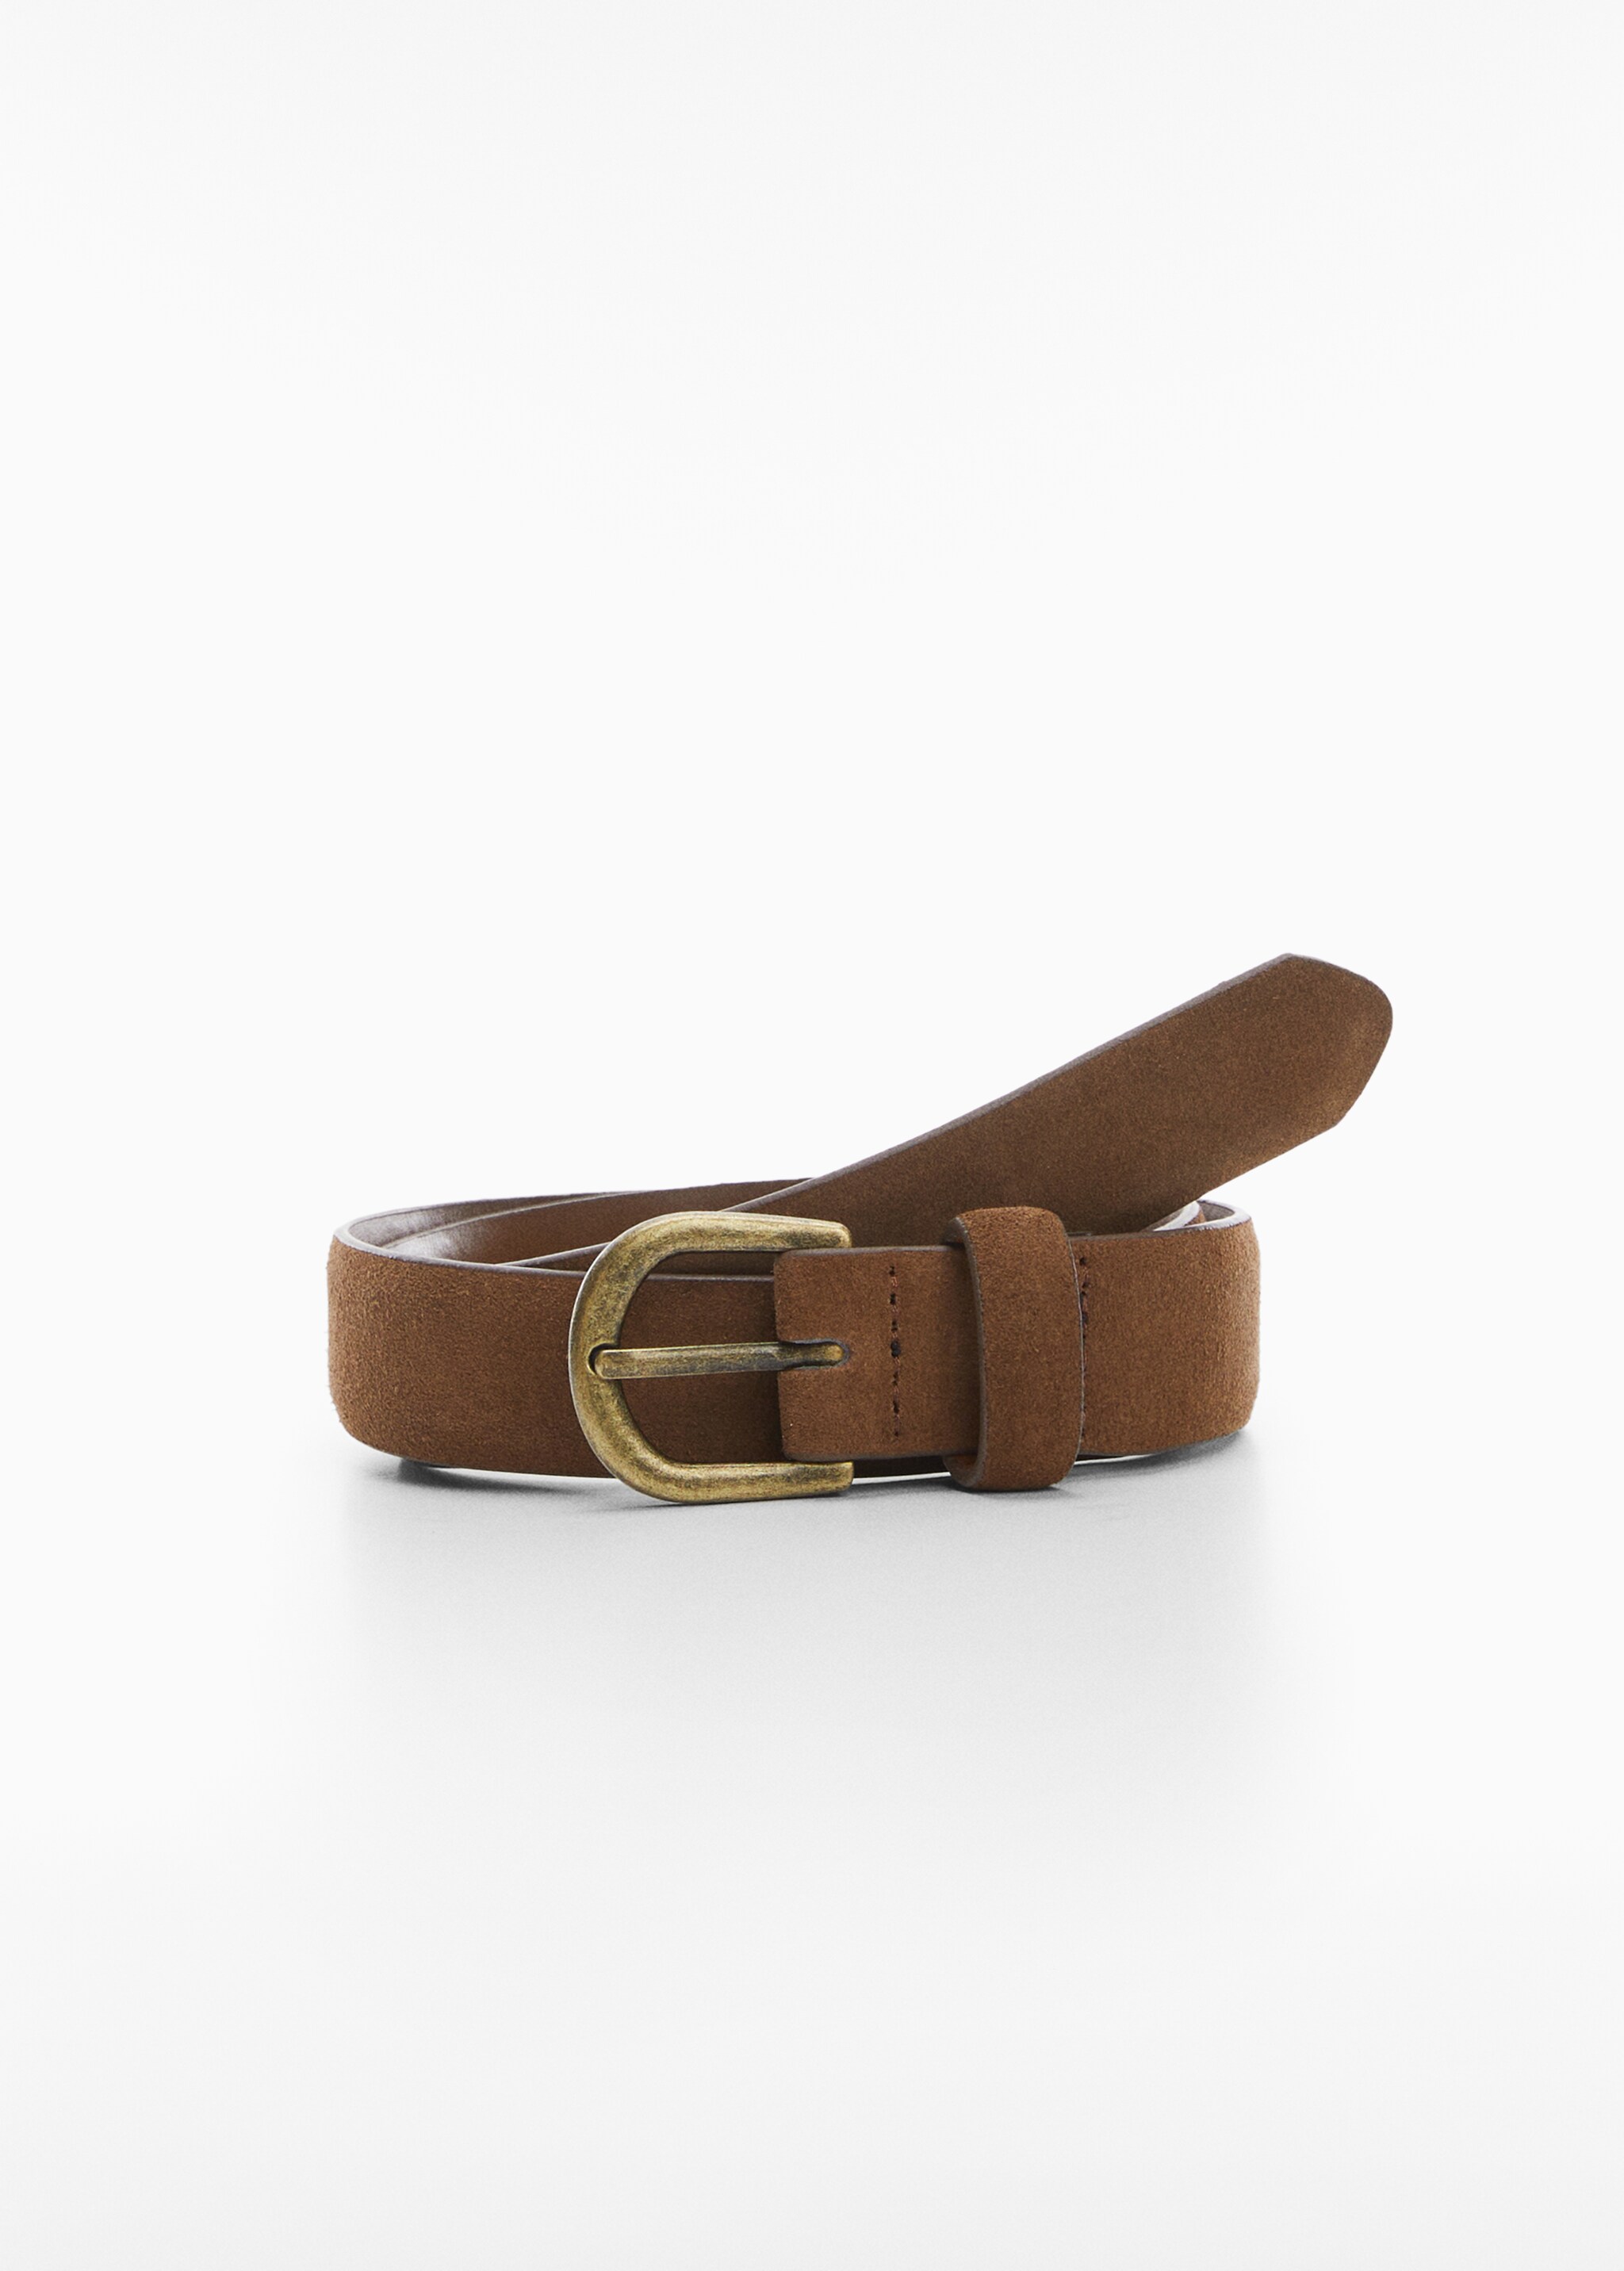 Metal buckle belt - Article without model